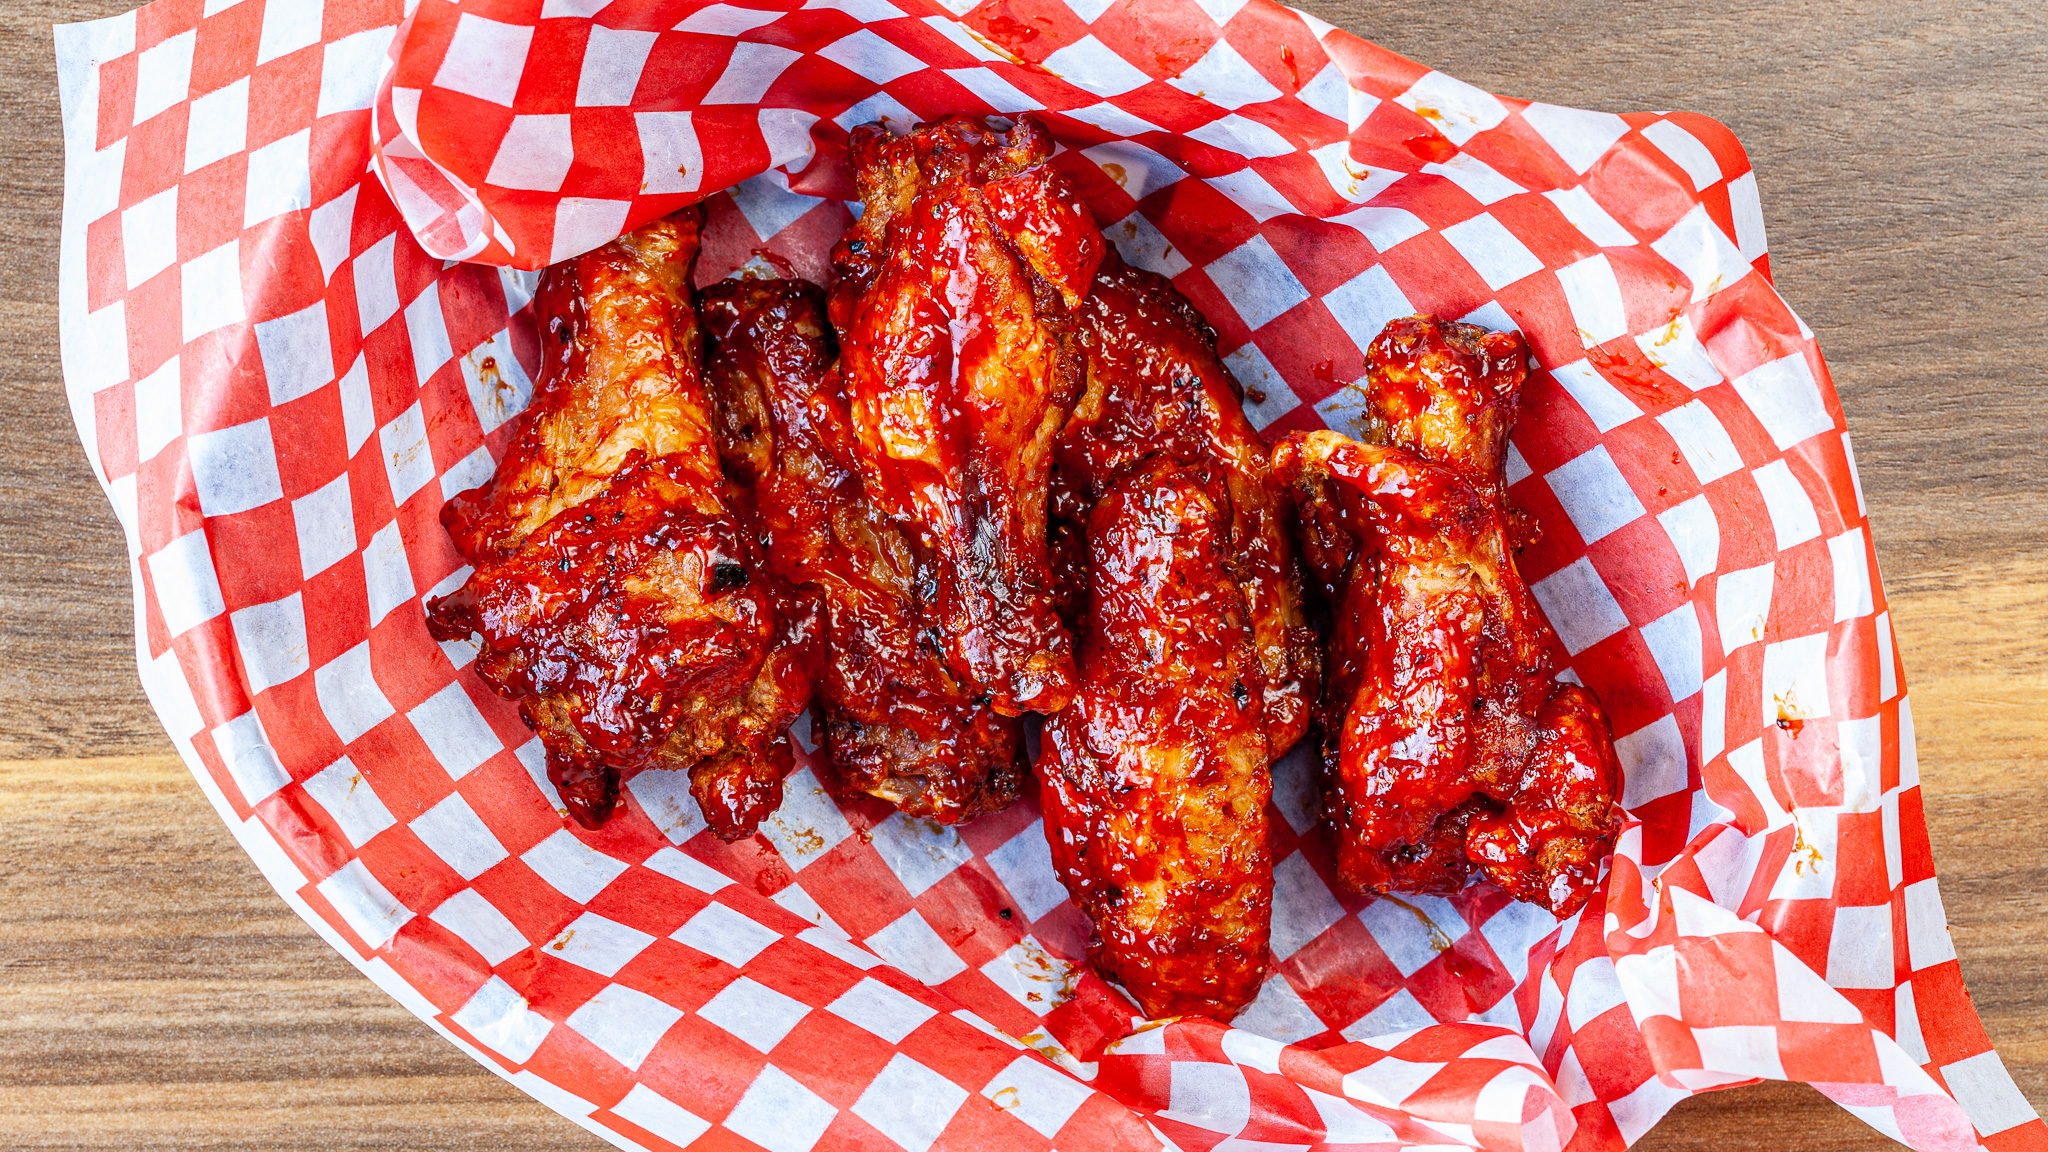 Prairie Dog Brewing's Smoked Chicken Wings - Regular size with 6 large, sauced or rubbed Canadian chicken wings, shown in a dine-in basket.